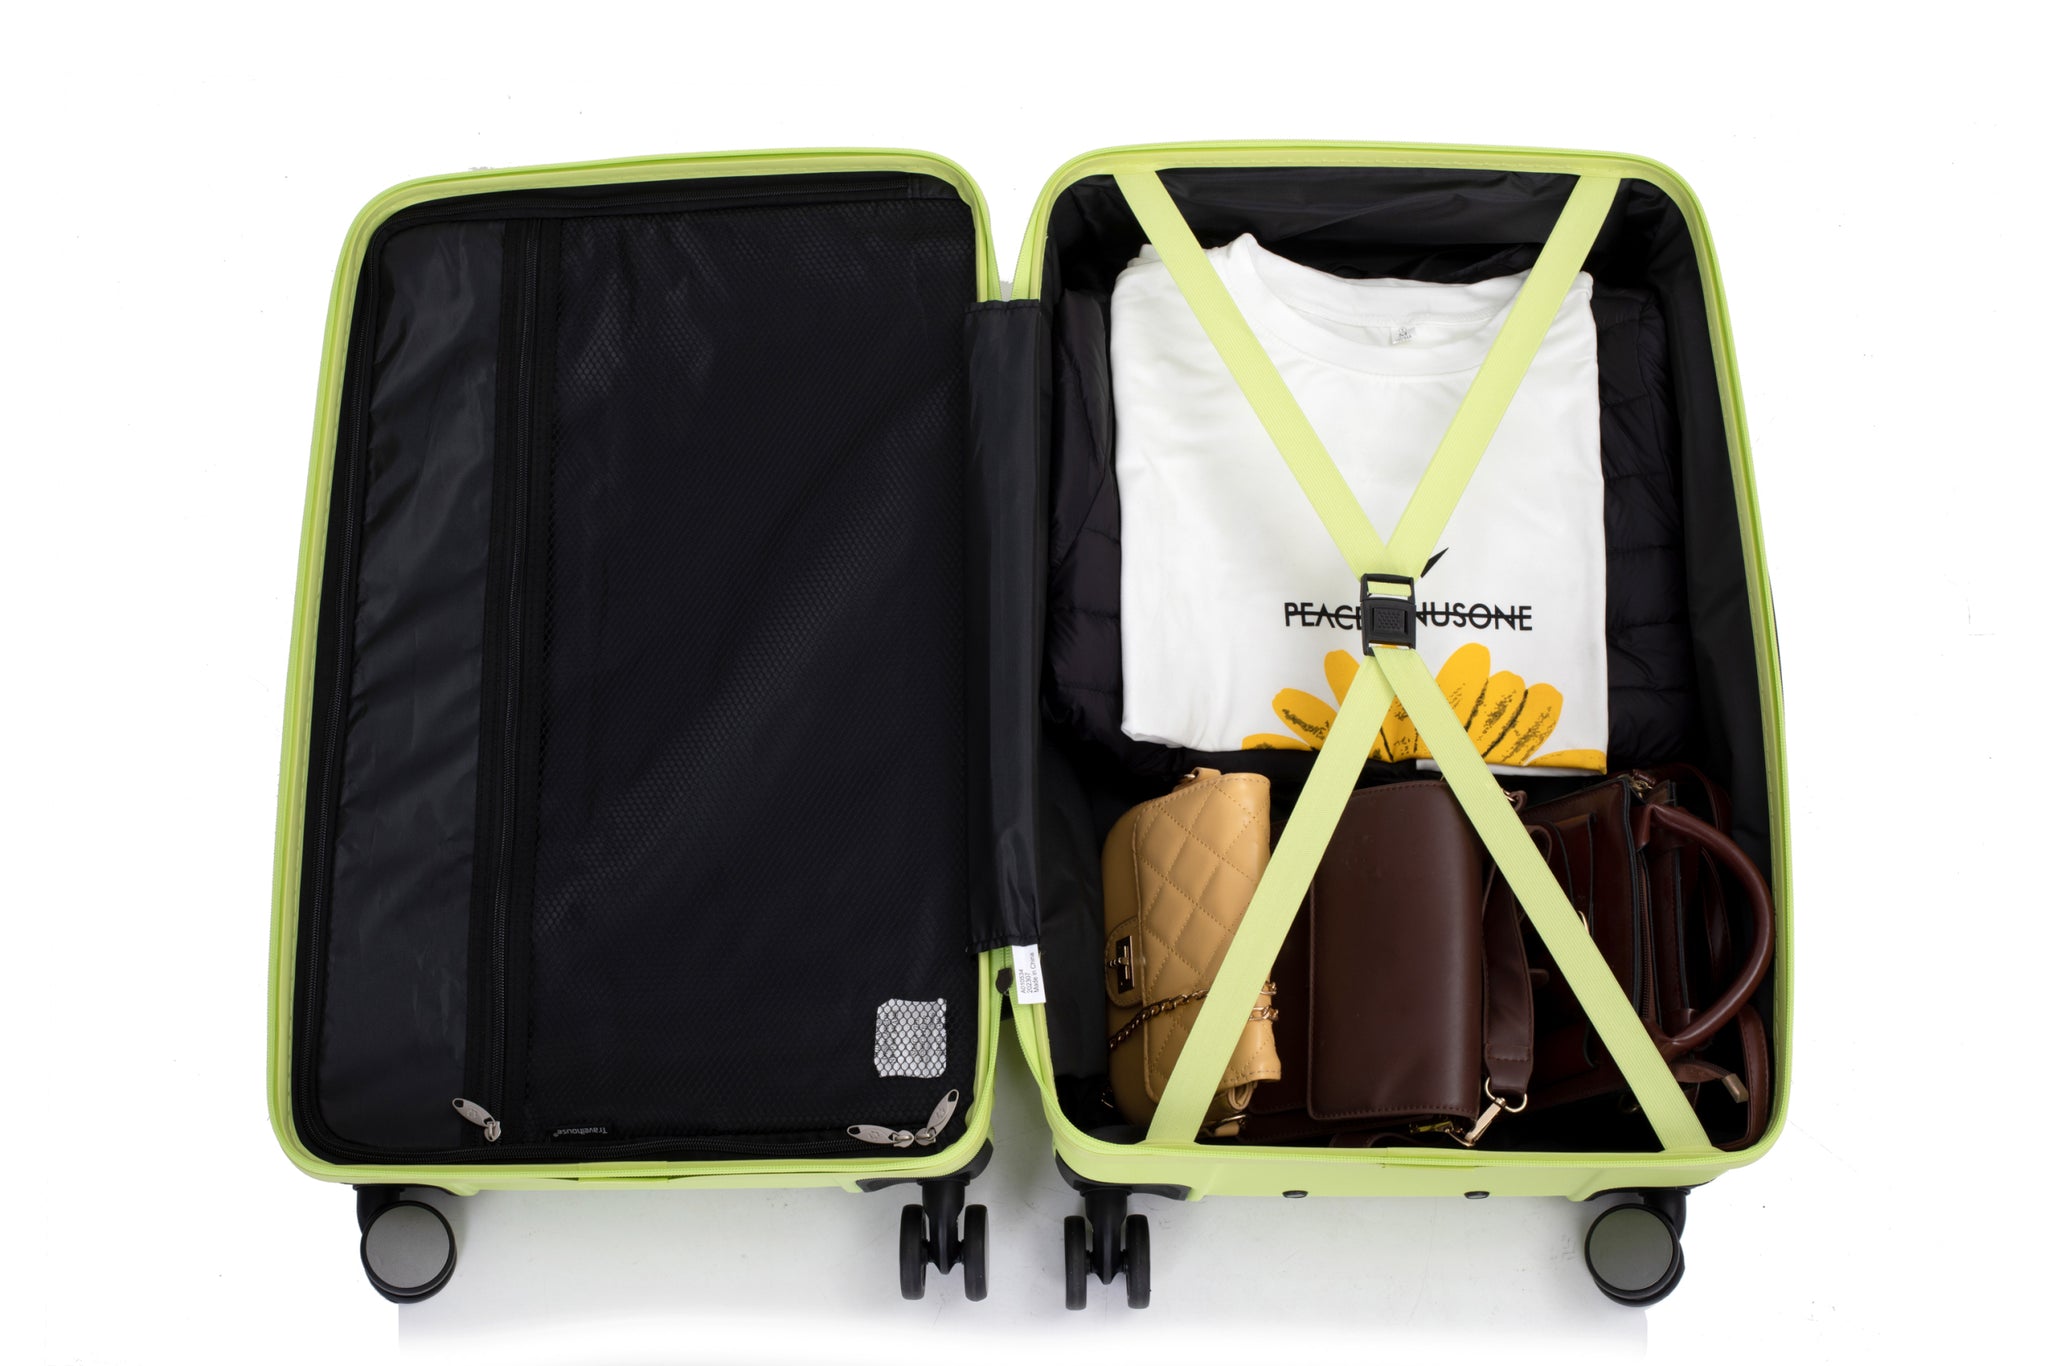 3 Piece Luggage Sets PC ABS Lightweight Suitcase with light green-abs+pc